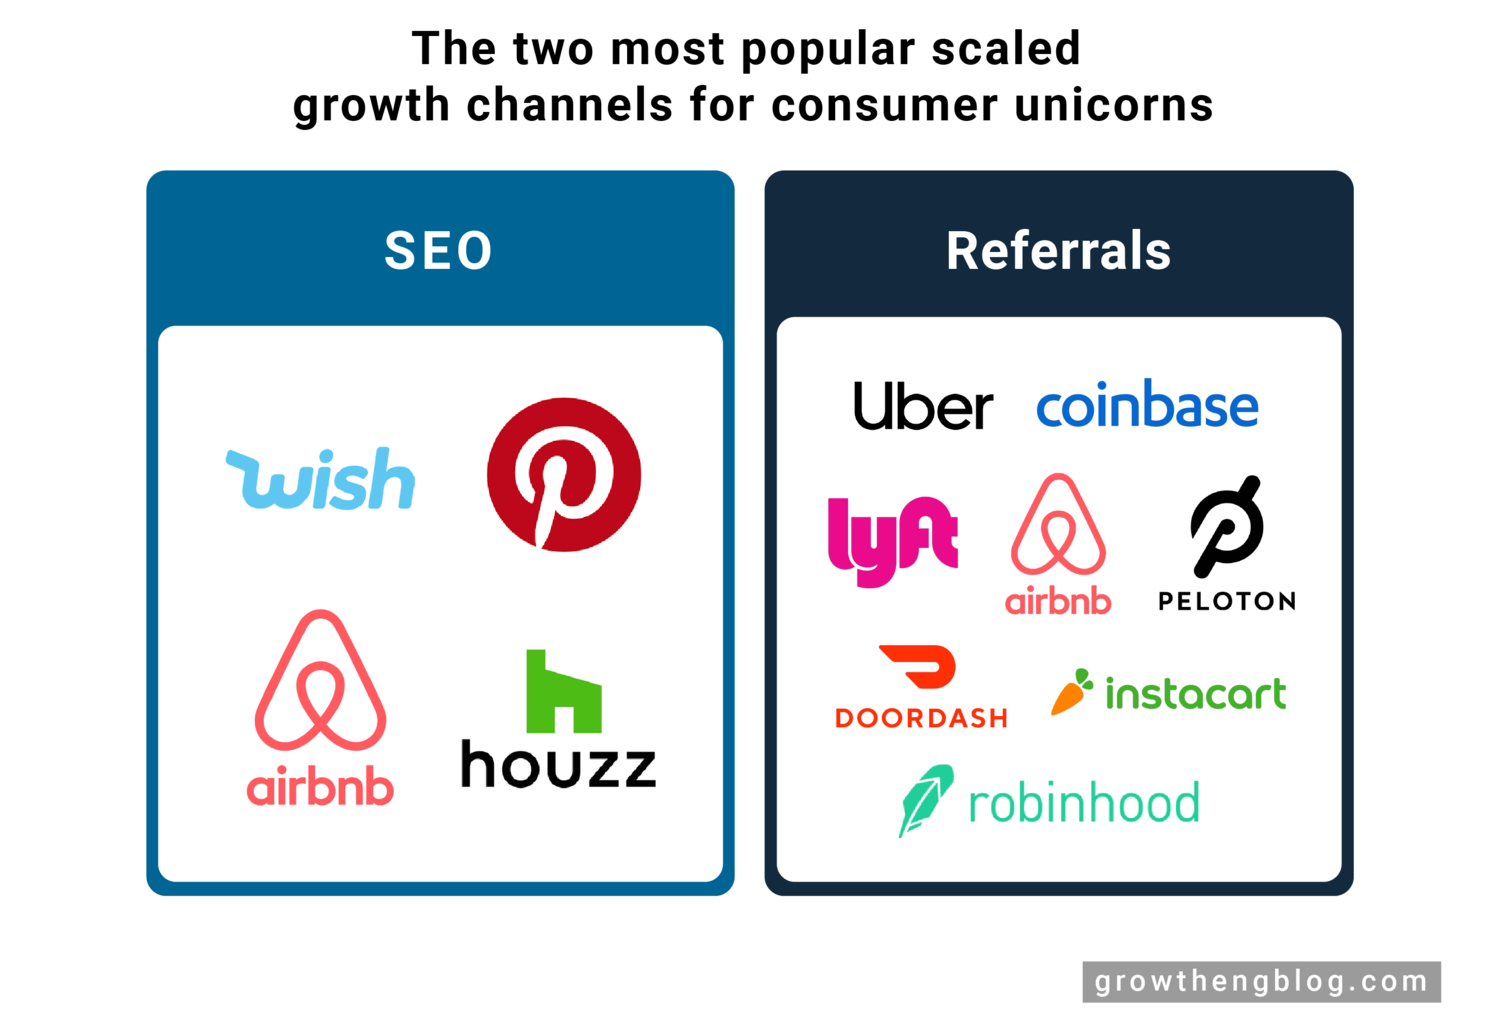 The 2 most popular scaled growth channels for unicorn consumer companies - Part 1 (SEO)